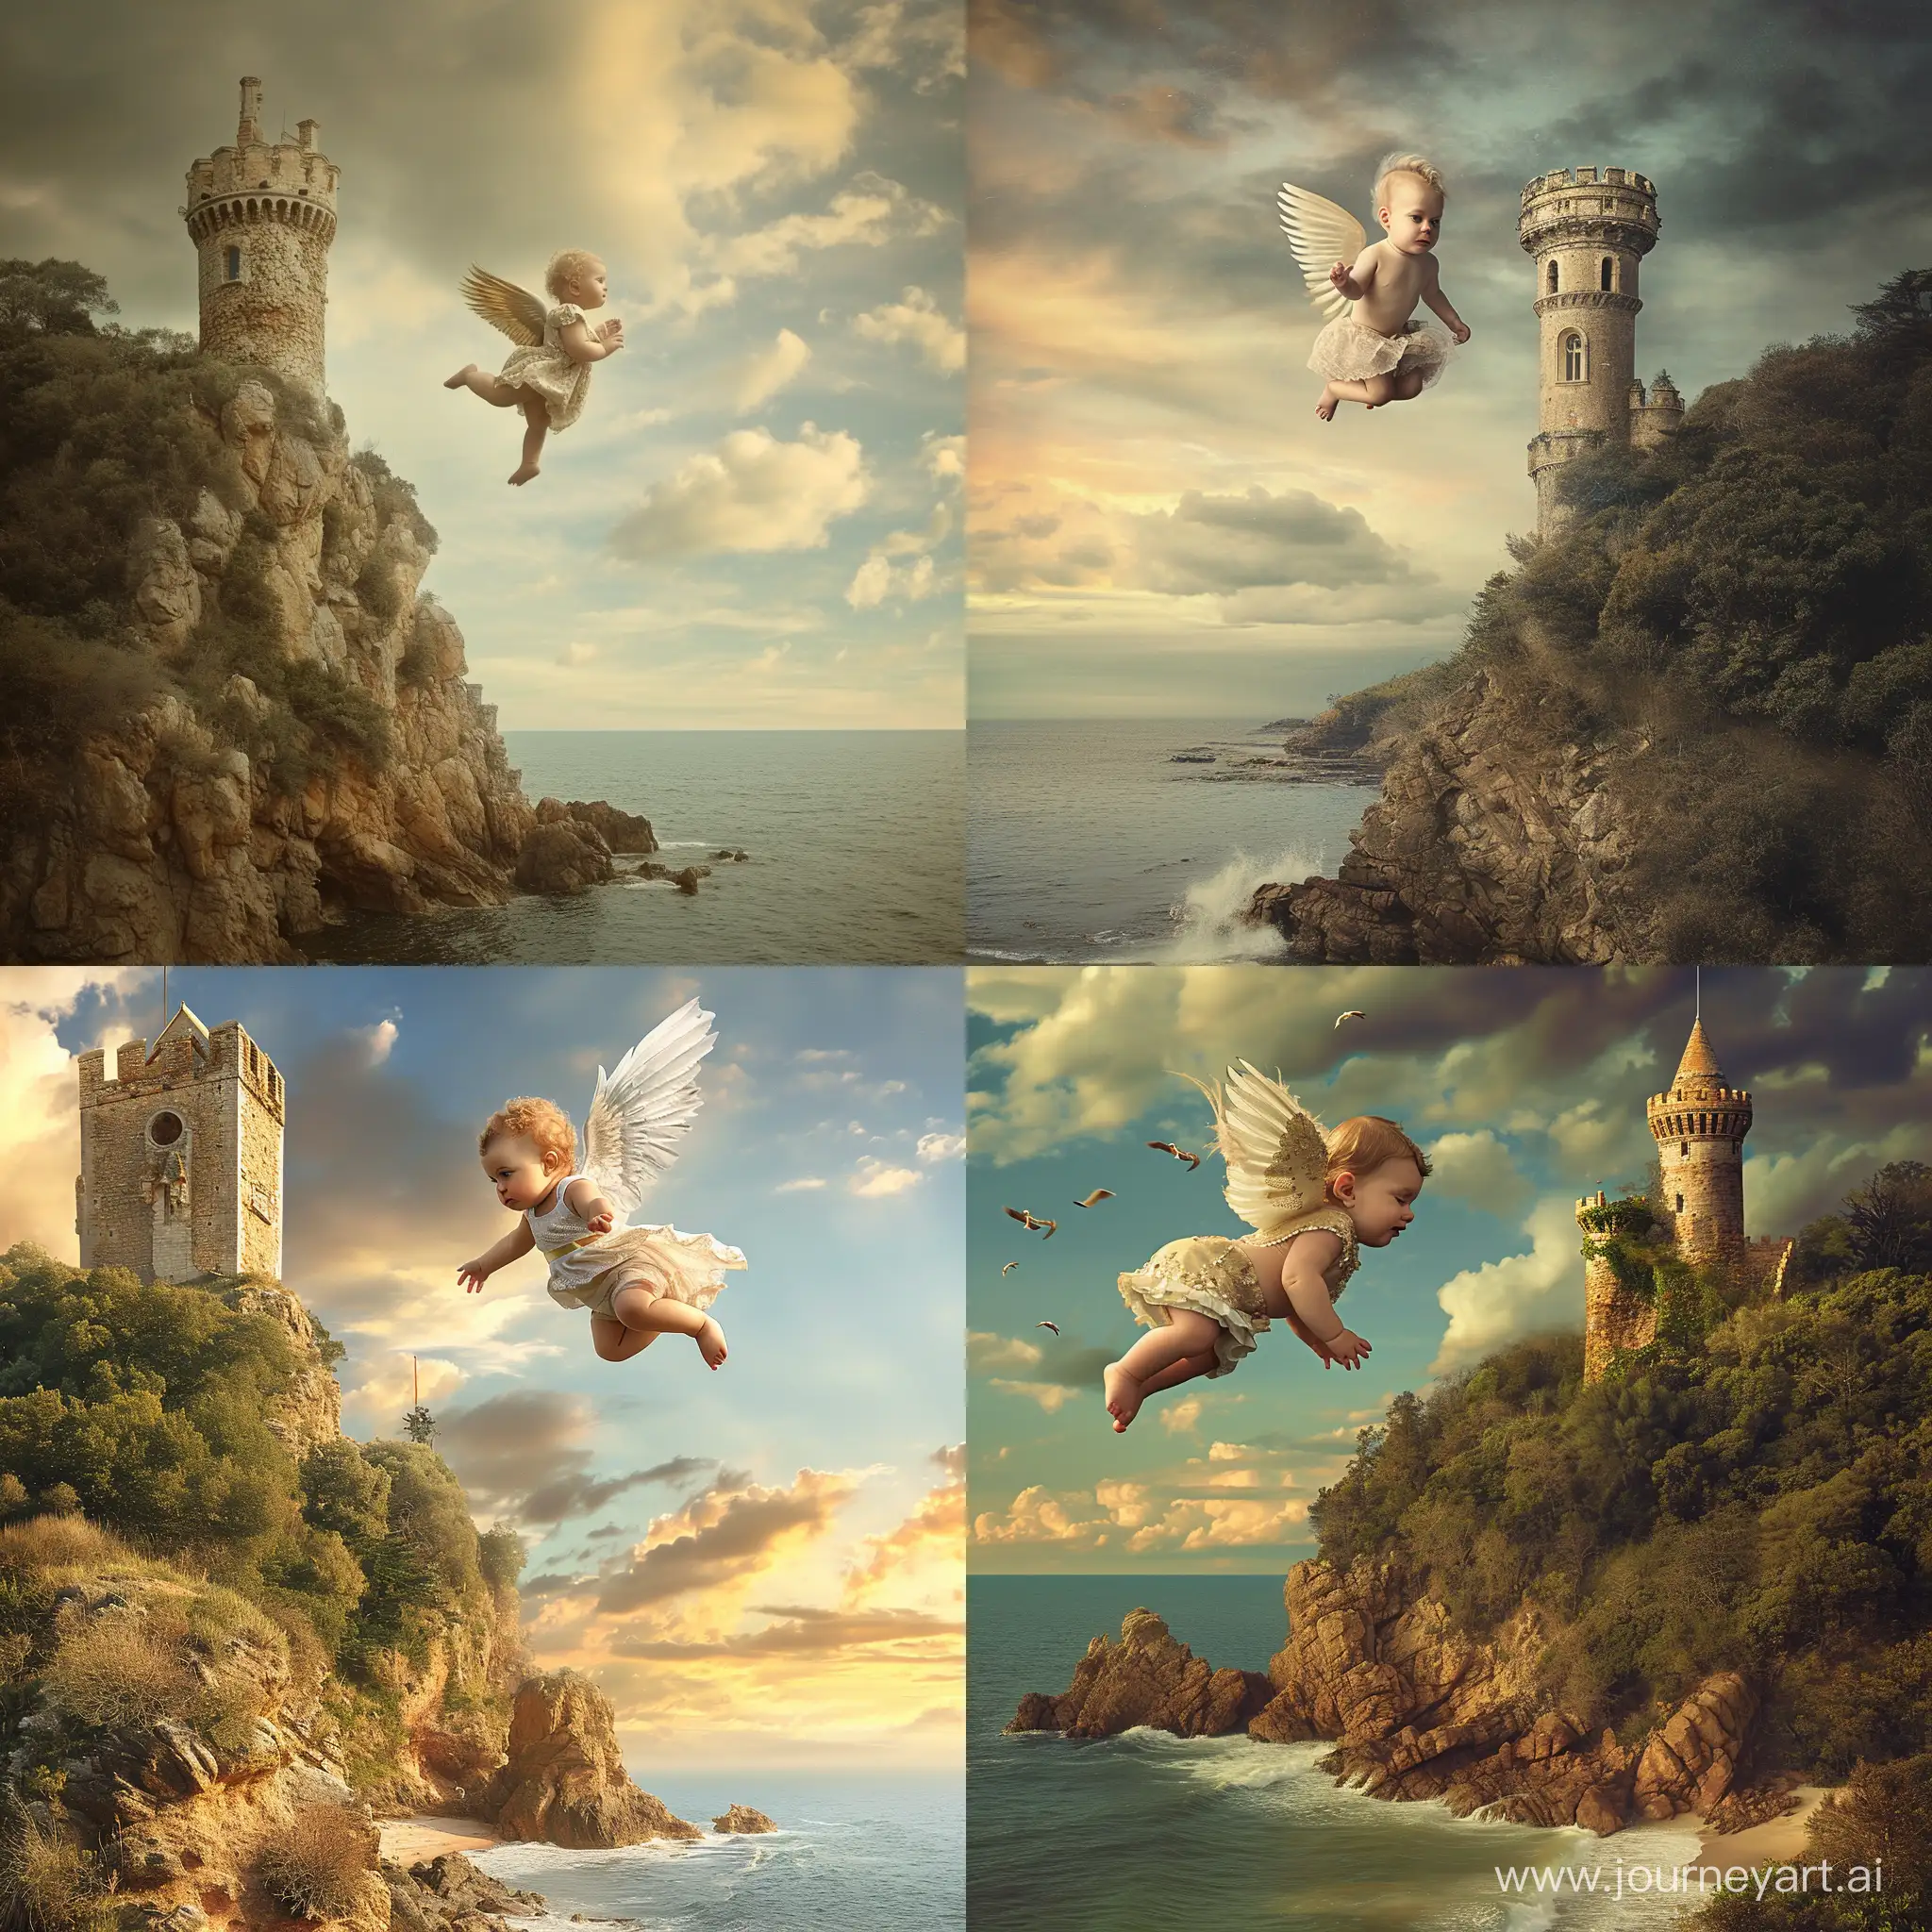 Cherubic-Infant-Soaring-from-Enchanted-Castle-Tower-to-Coastal-Haven